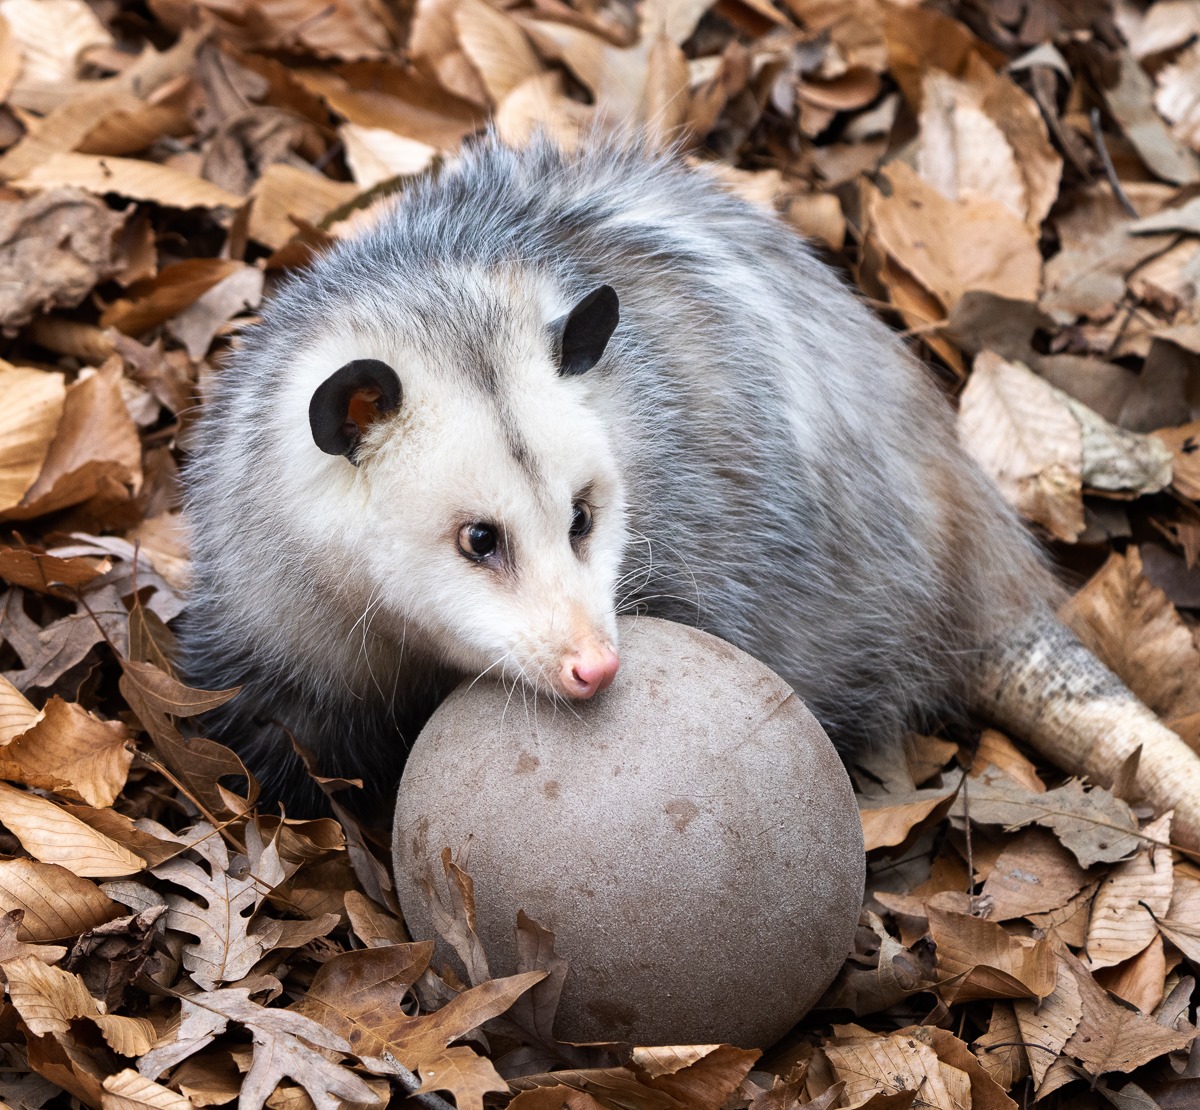 Live Natural Education- Meet the Opposum